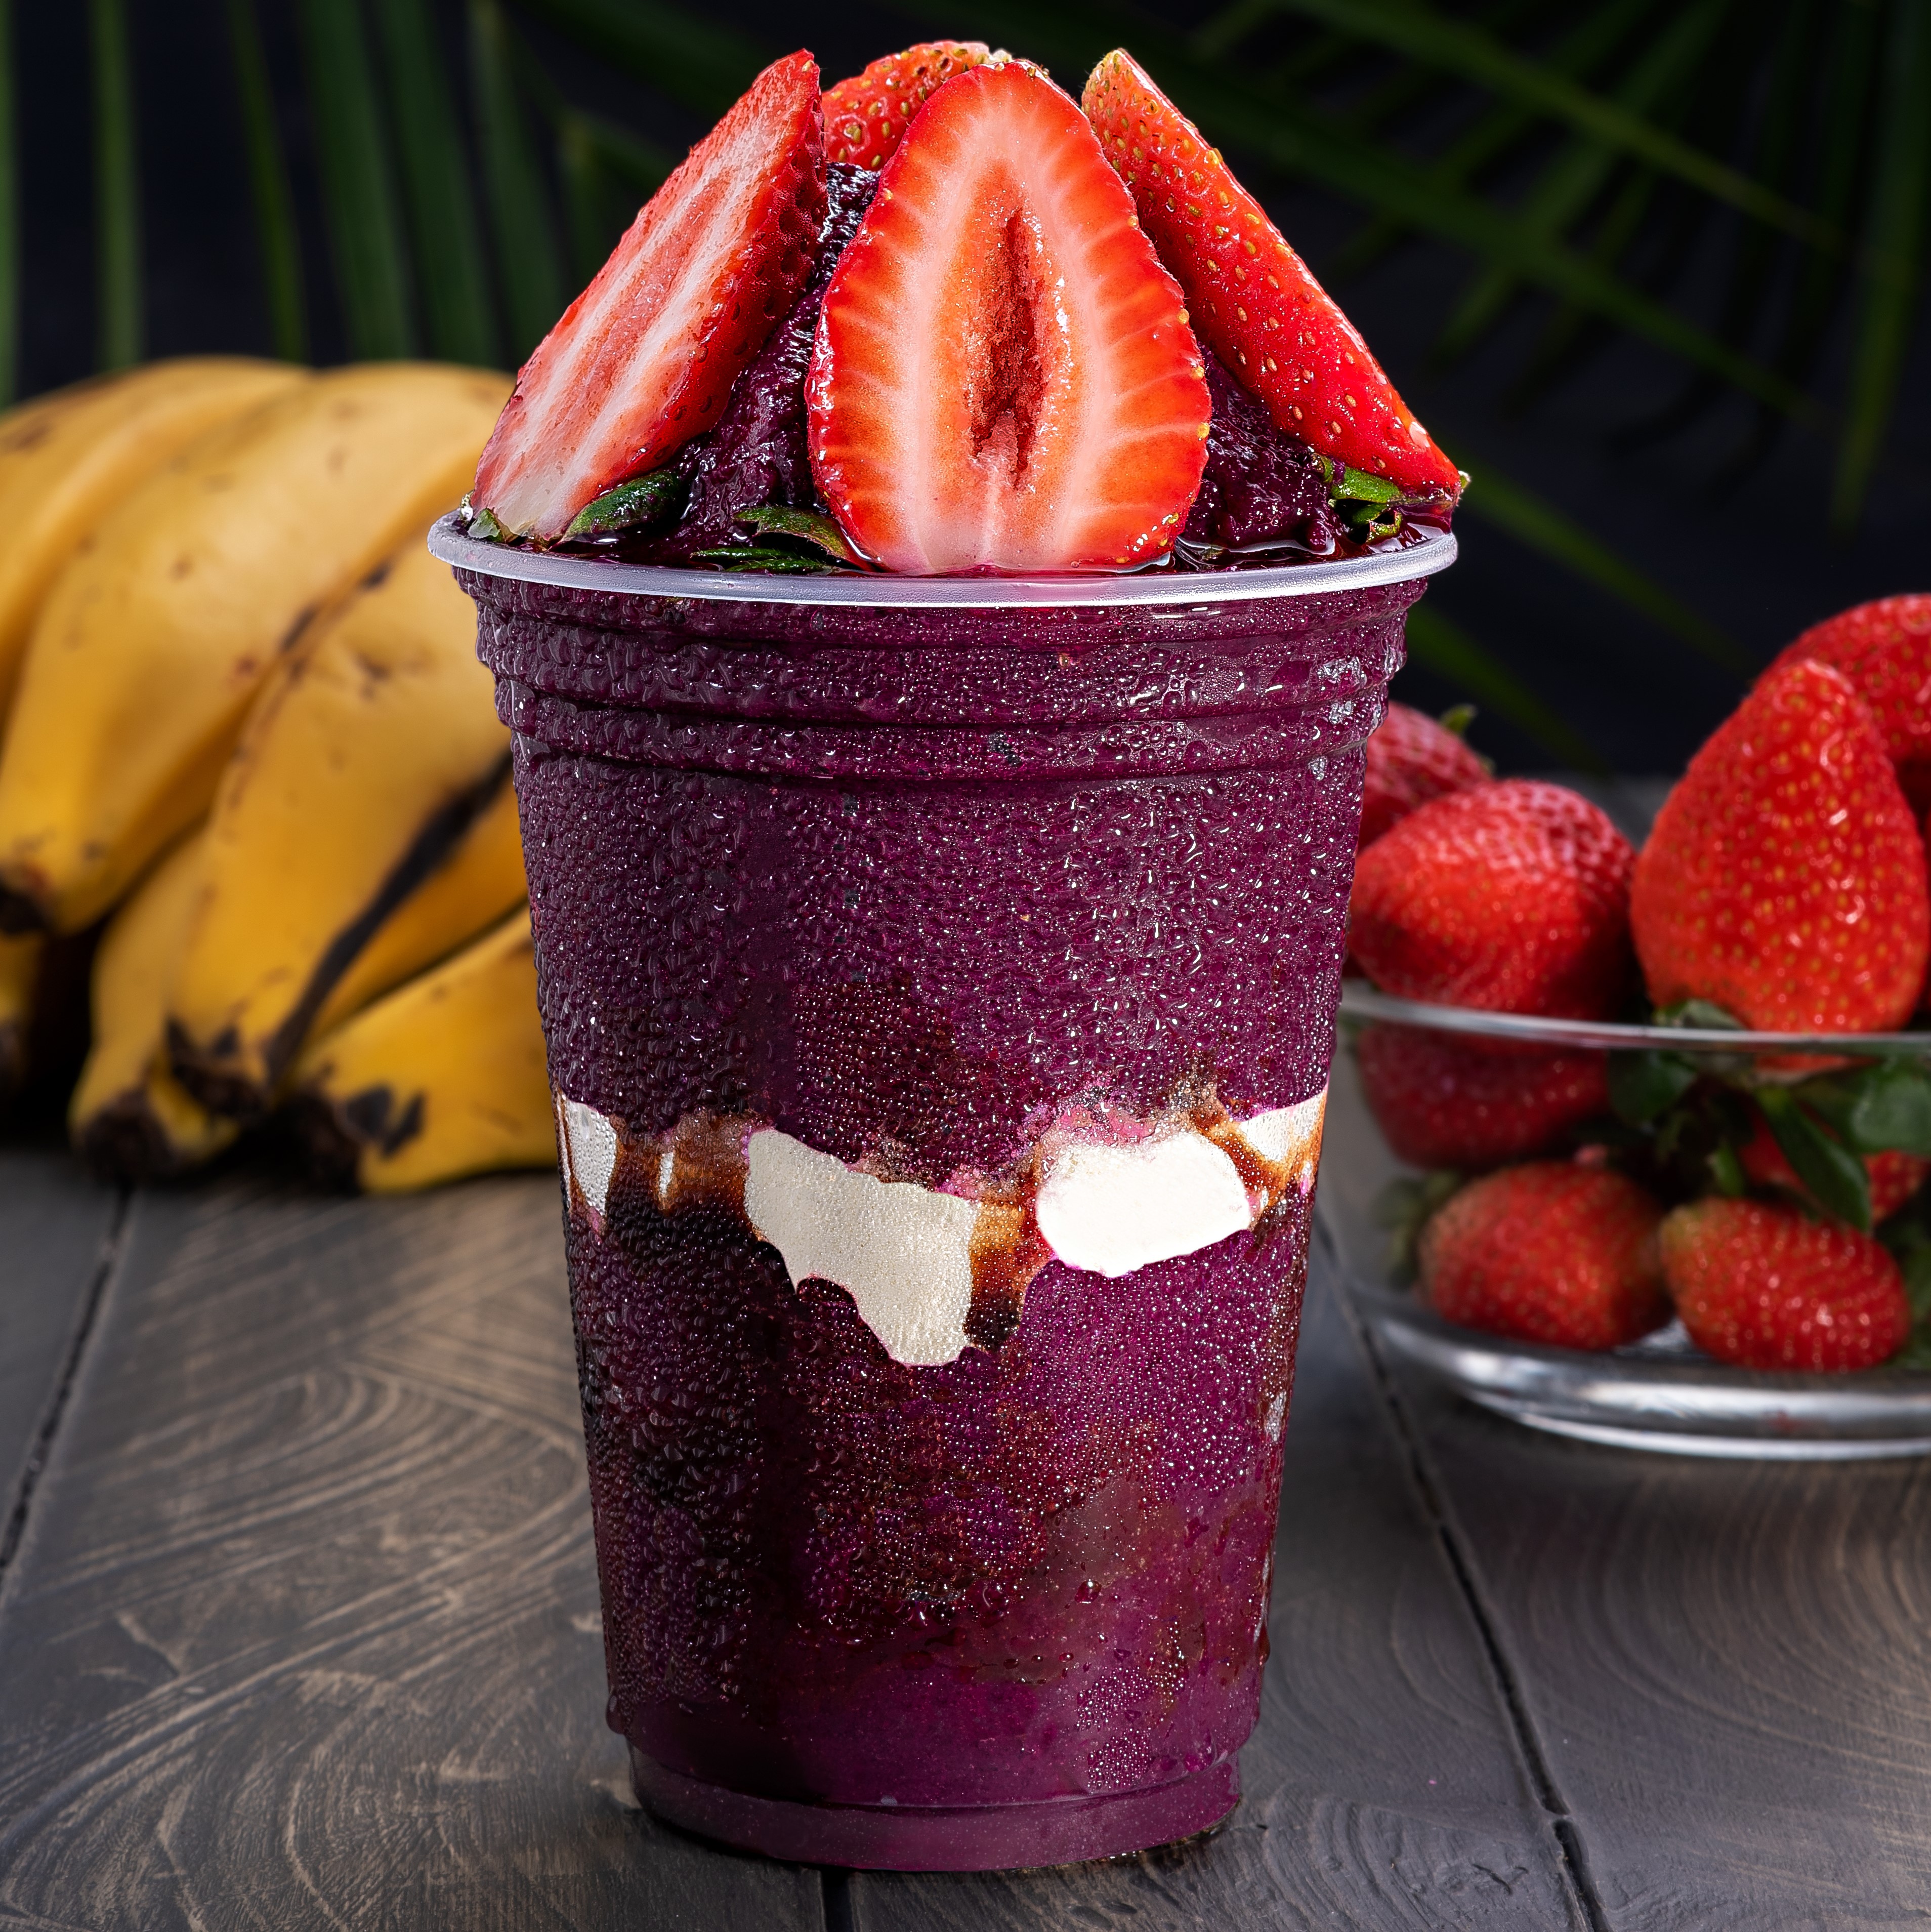 https://www.whitsons.com/sites/default/files/GettyImages-1324961580%20acai%20smoothie.jpg